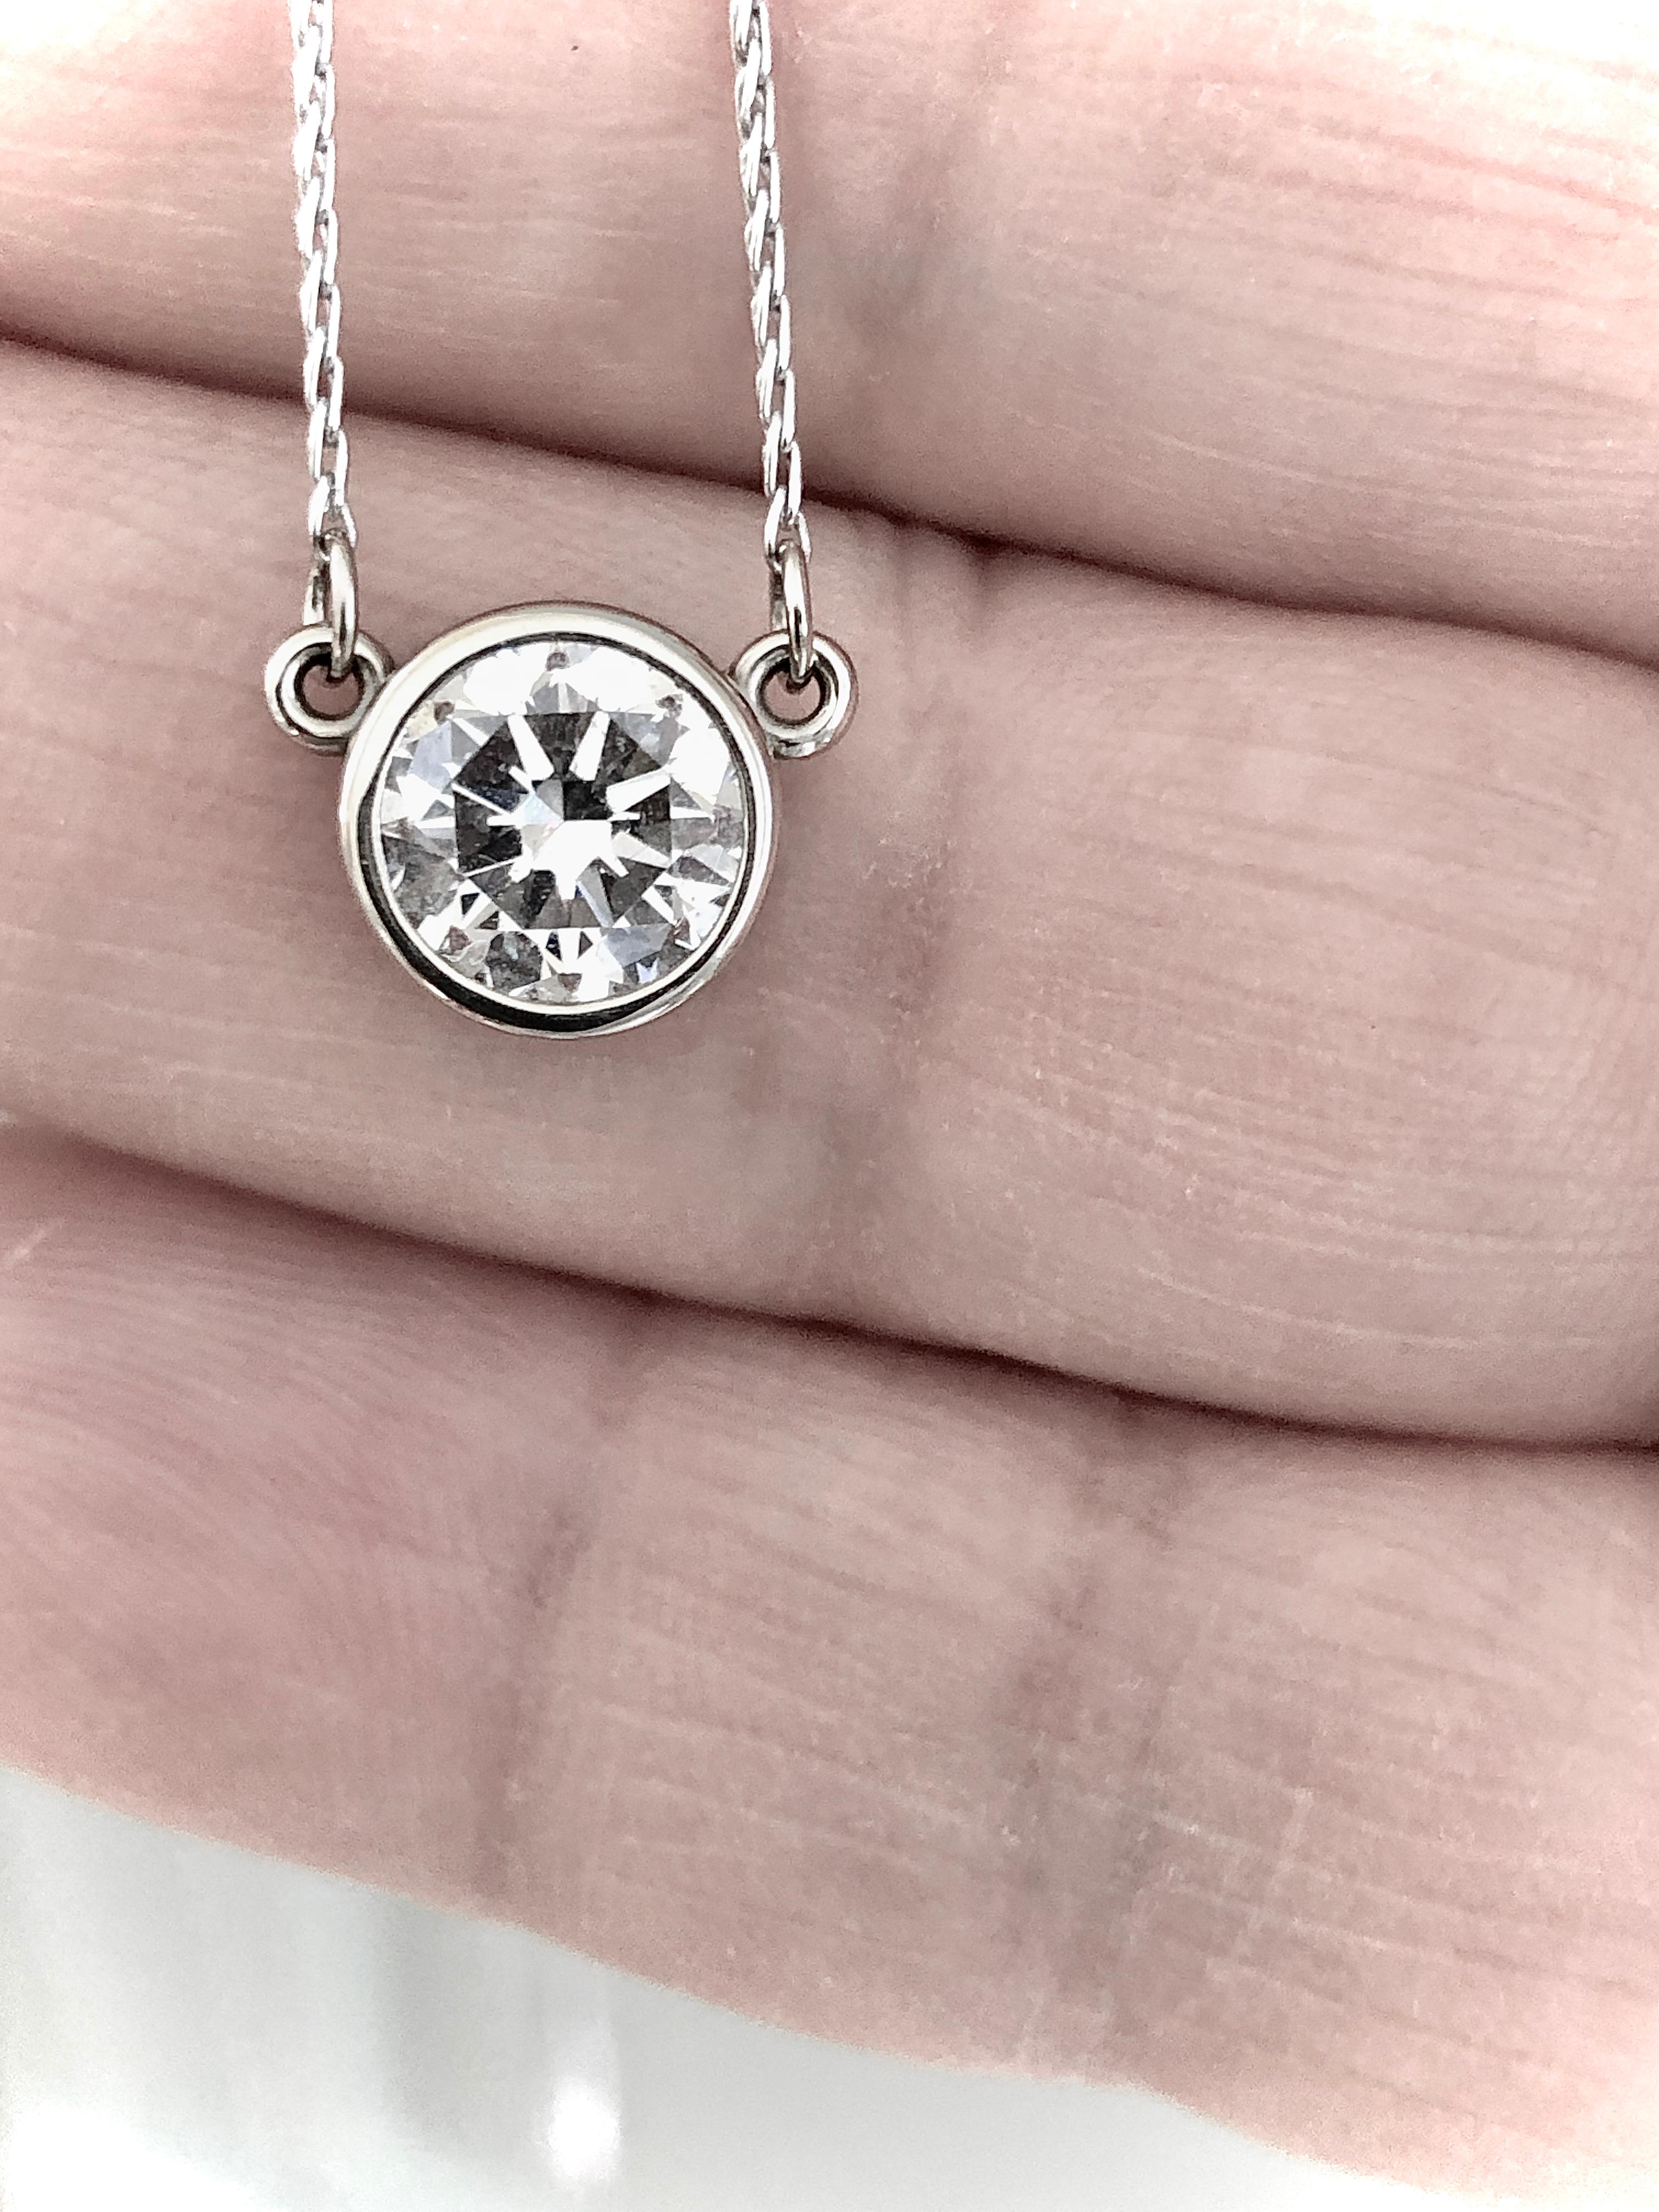 1.50 carat bright sparkly round brilliant cut diamond pendant necklace. Face up white with just a hint of color. 1 Round Brilliant cut  J- SI1 diamond,  1.50 carat (7.16mm).  14k white gold  3.4 grams. Chain: 18.25 Inches
Natural Diamond 
Average